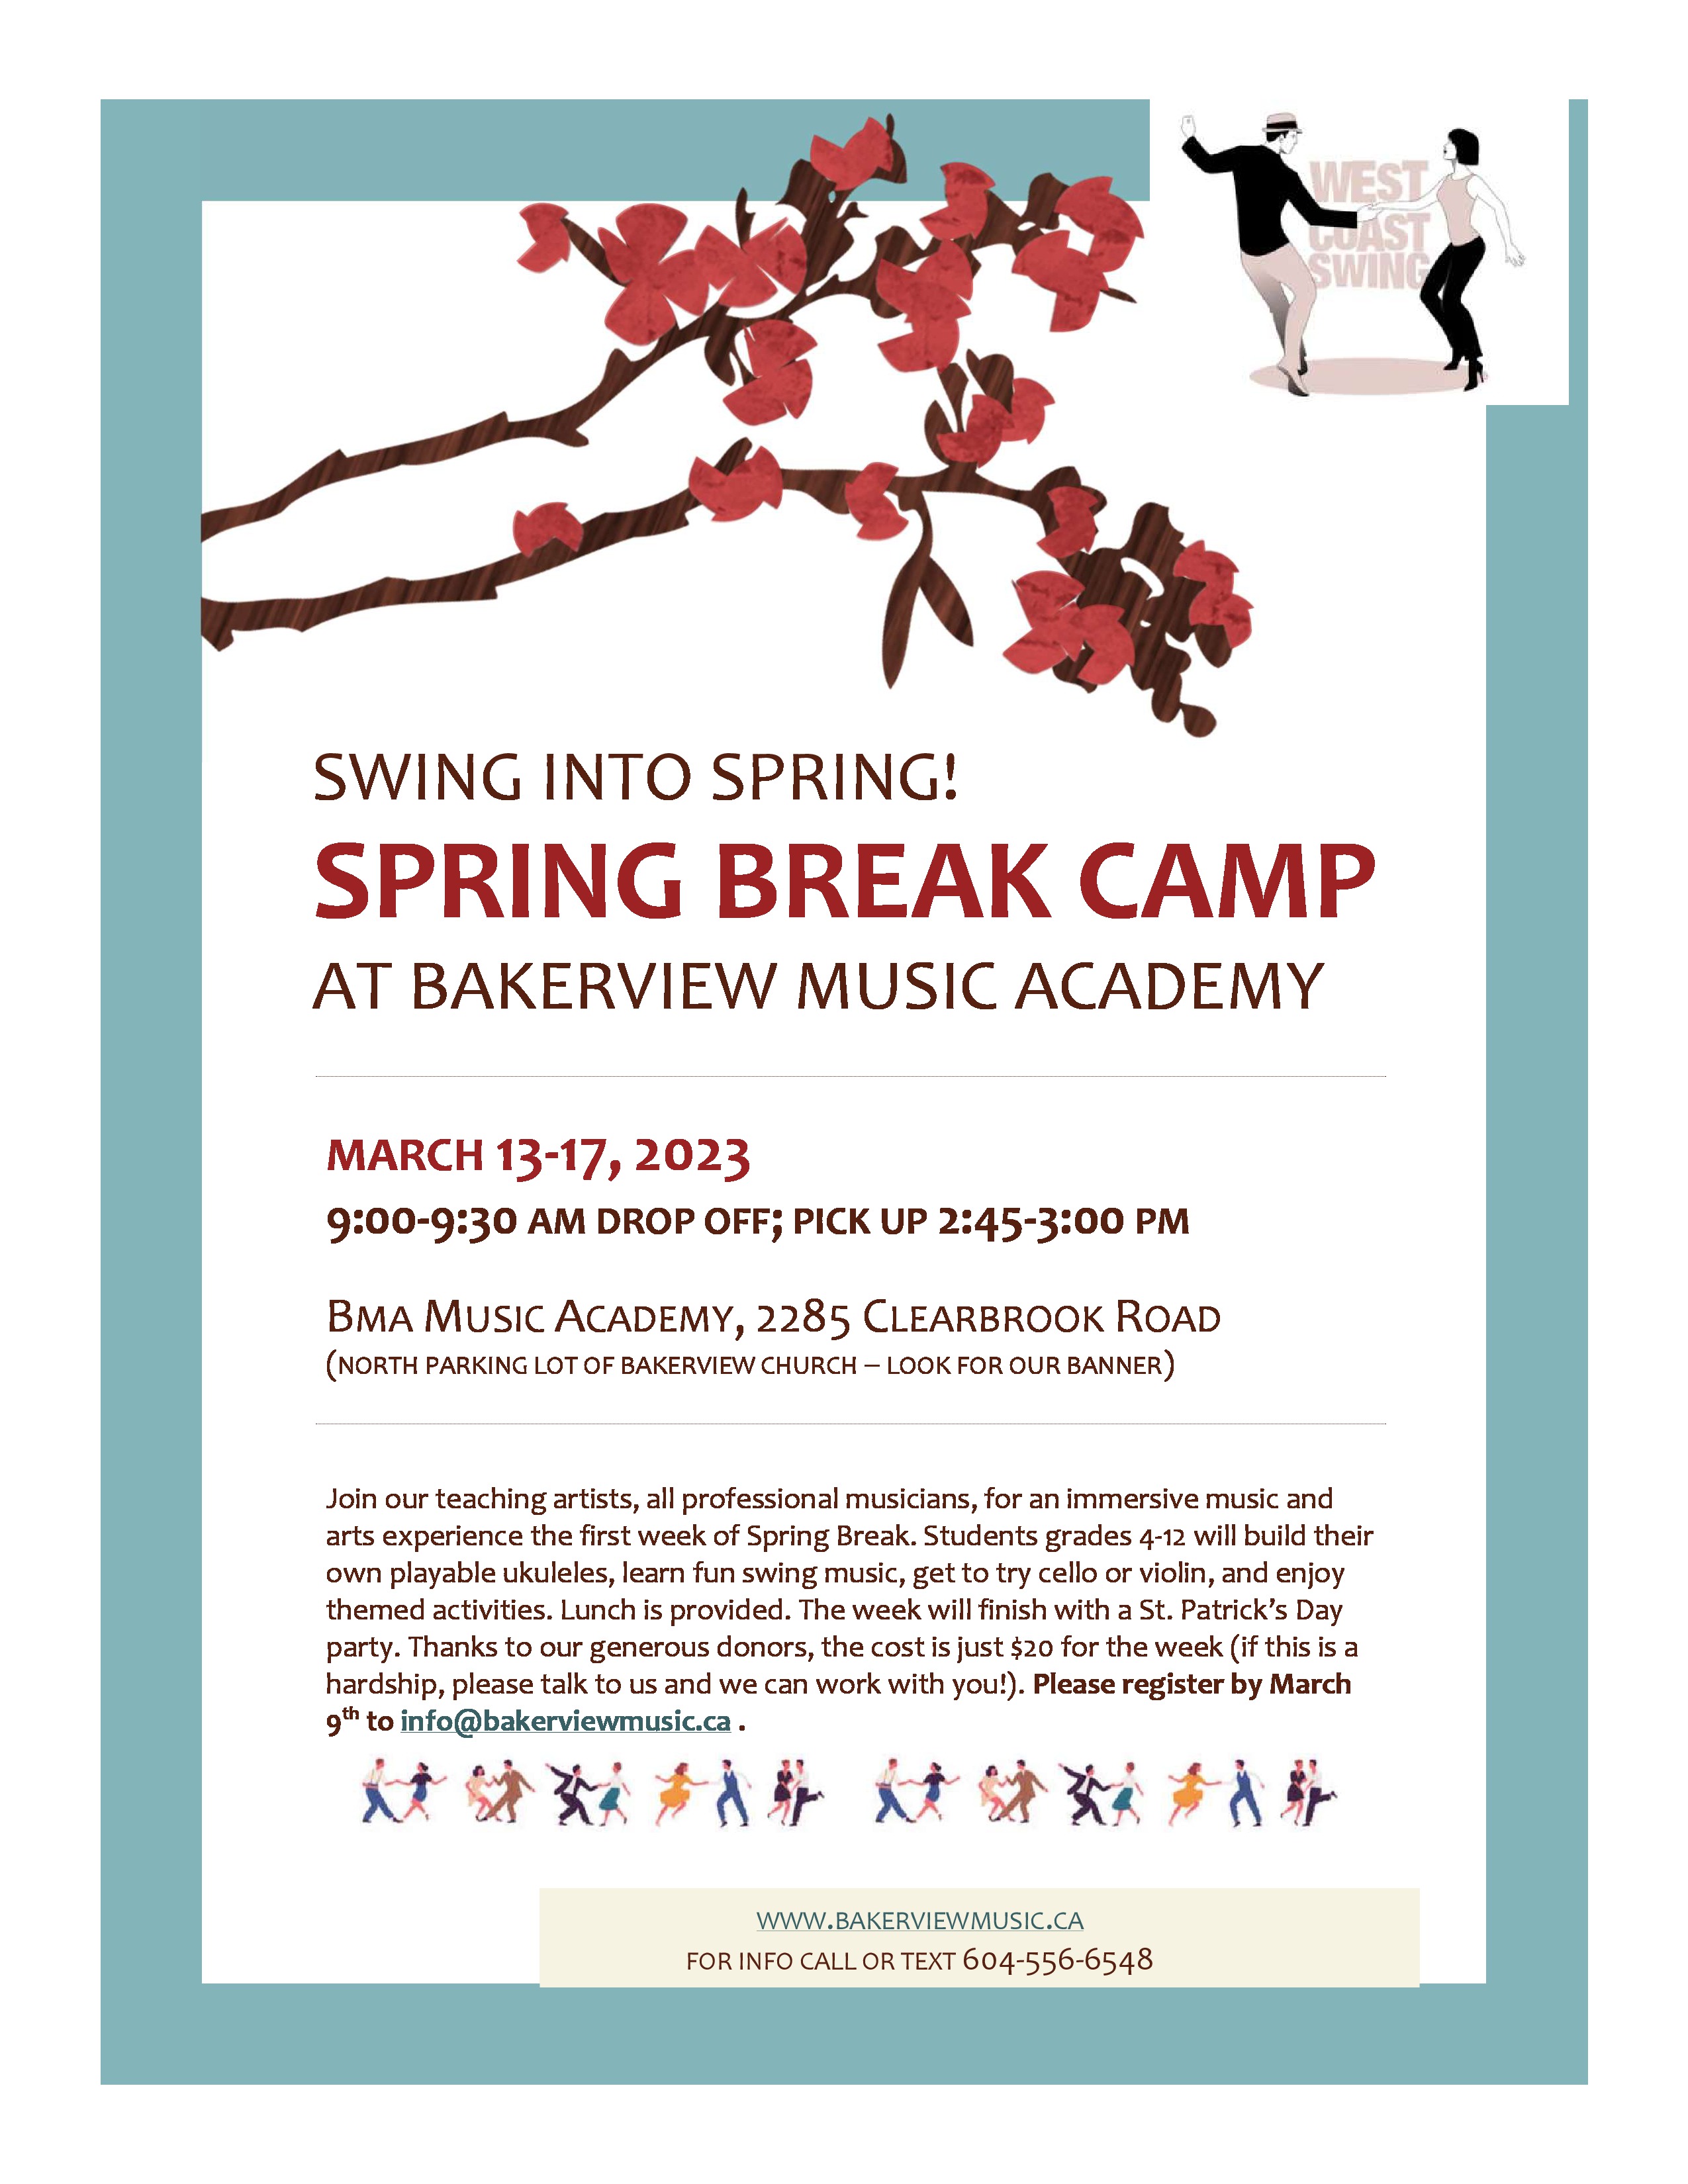 Swing Into Spring Break Camp at Bakerview Music Academy – registration open to public